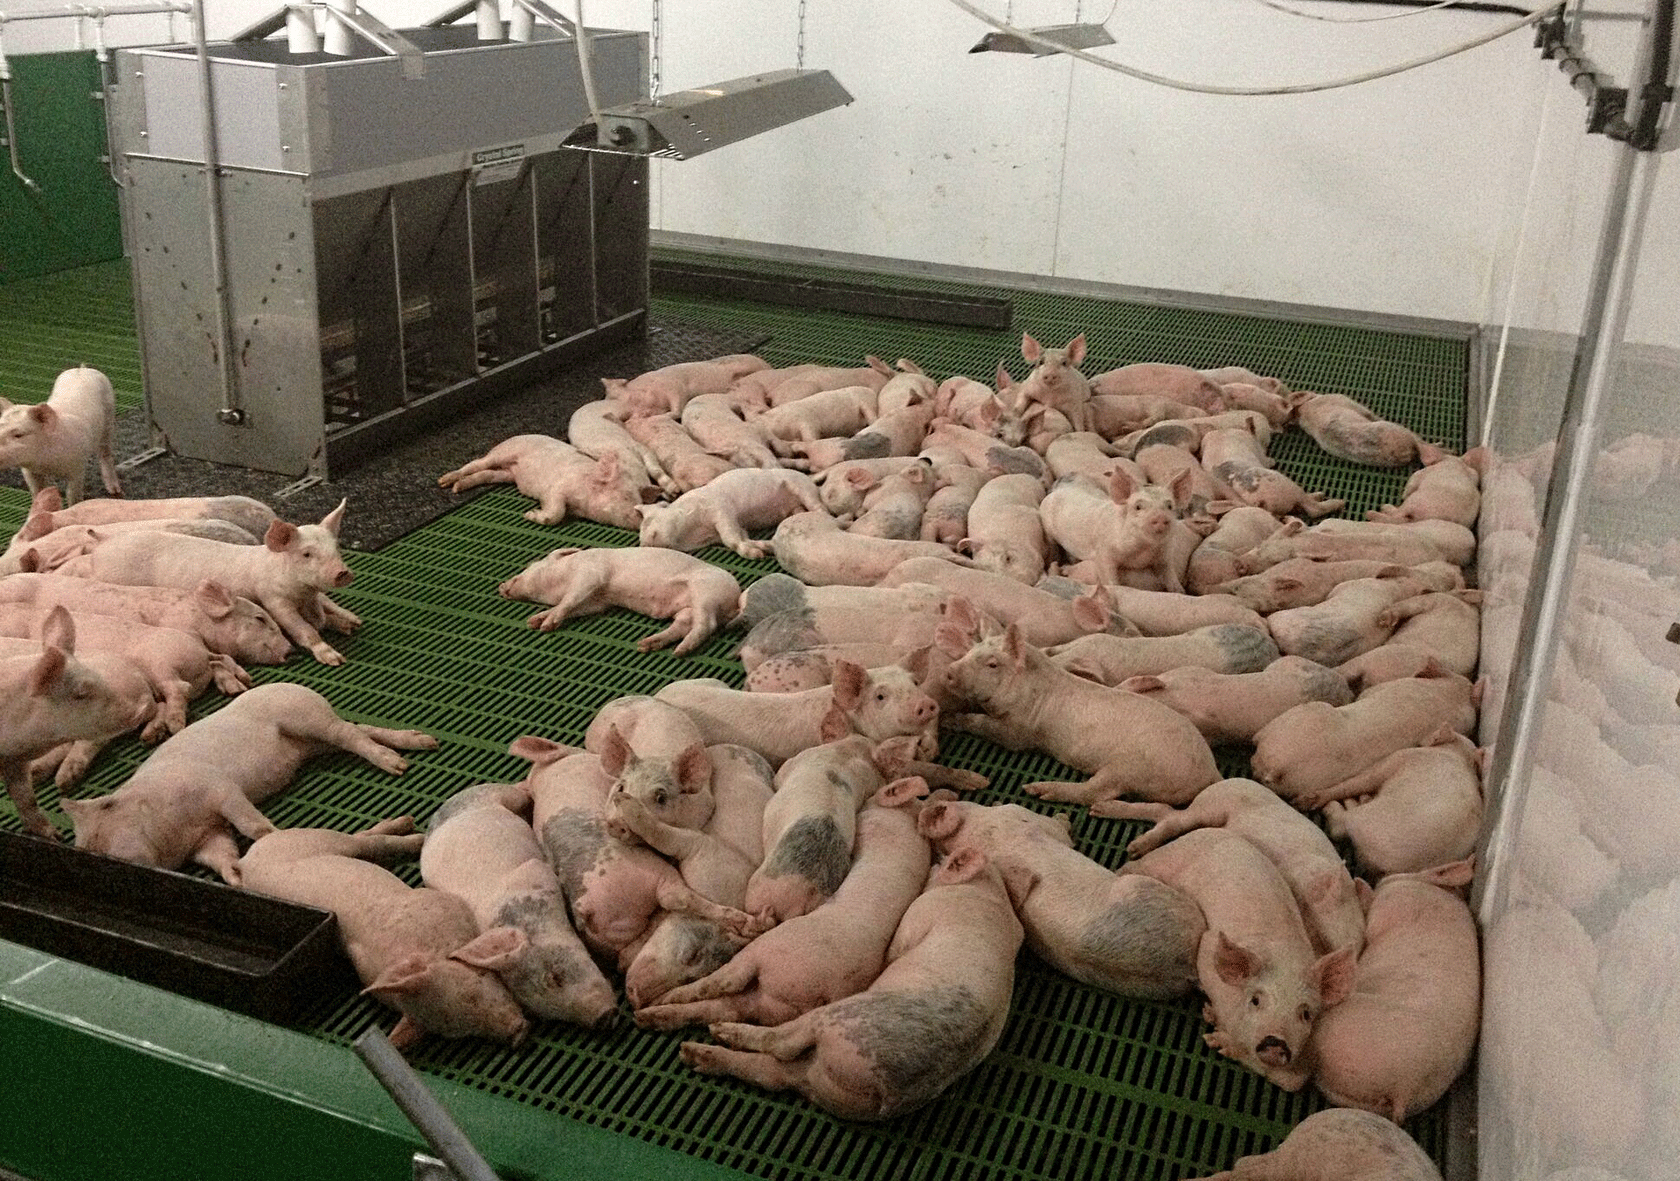 Research has shown that pigs often chill out&nbsp;and take a siesta during the day during hot weather and do&nbsp;their eating and drinking earlier&nbsp;and later in the day
